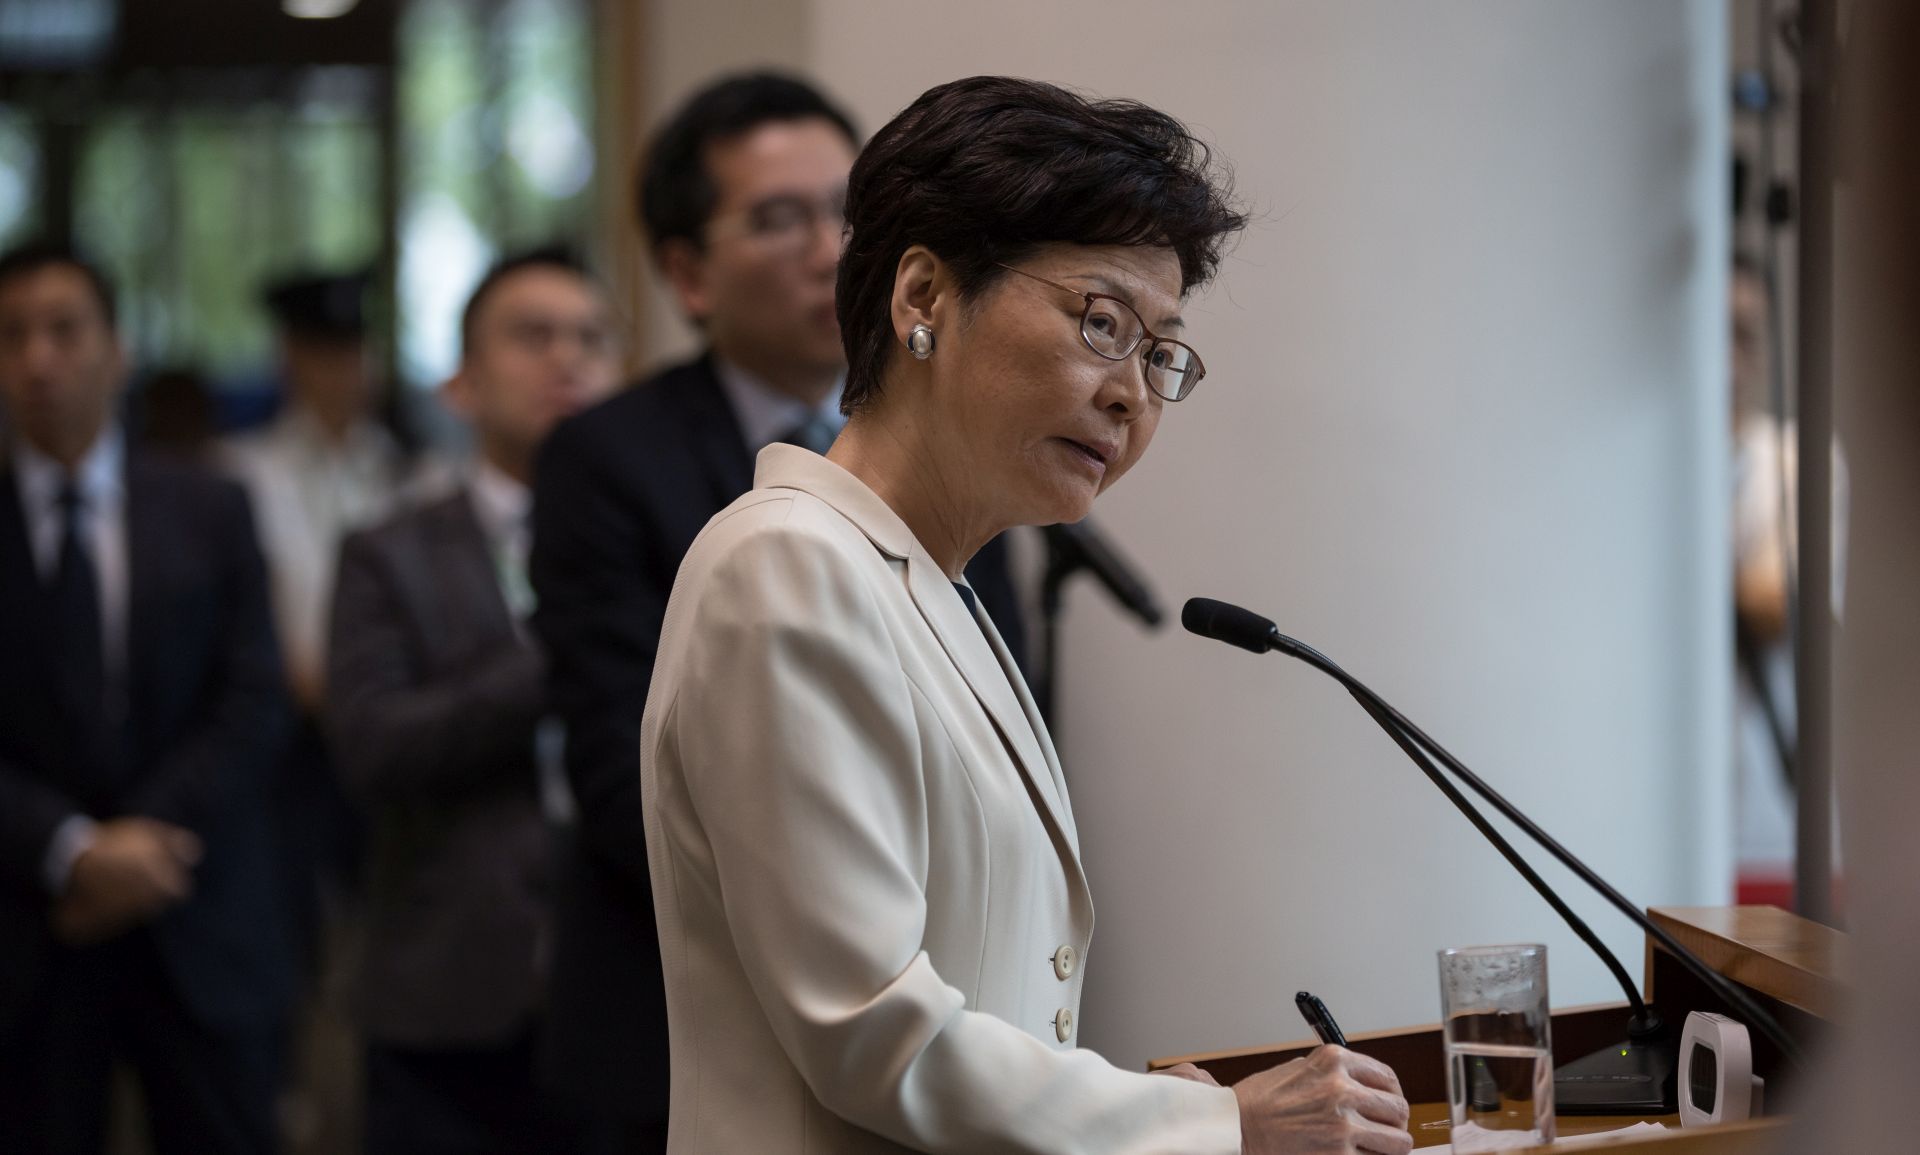 epa07847722 Hong Kong Chief Executive Carrie Lam speaks during a press conference at the Central Government Offices in Hong Kong, China, 17 September 2019. A new Policy Innovation and Coordination Office reporting directly to Lam was launched on 16 September to solve the protest crisis that has been engulfing Hong Kong for three months.  EPA/JEROME FAVRE